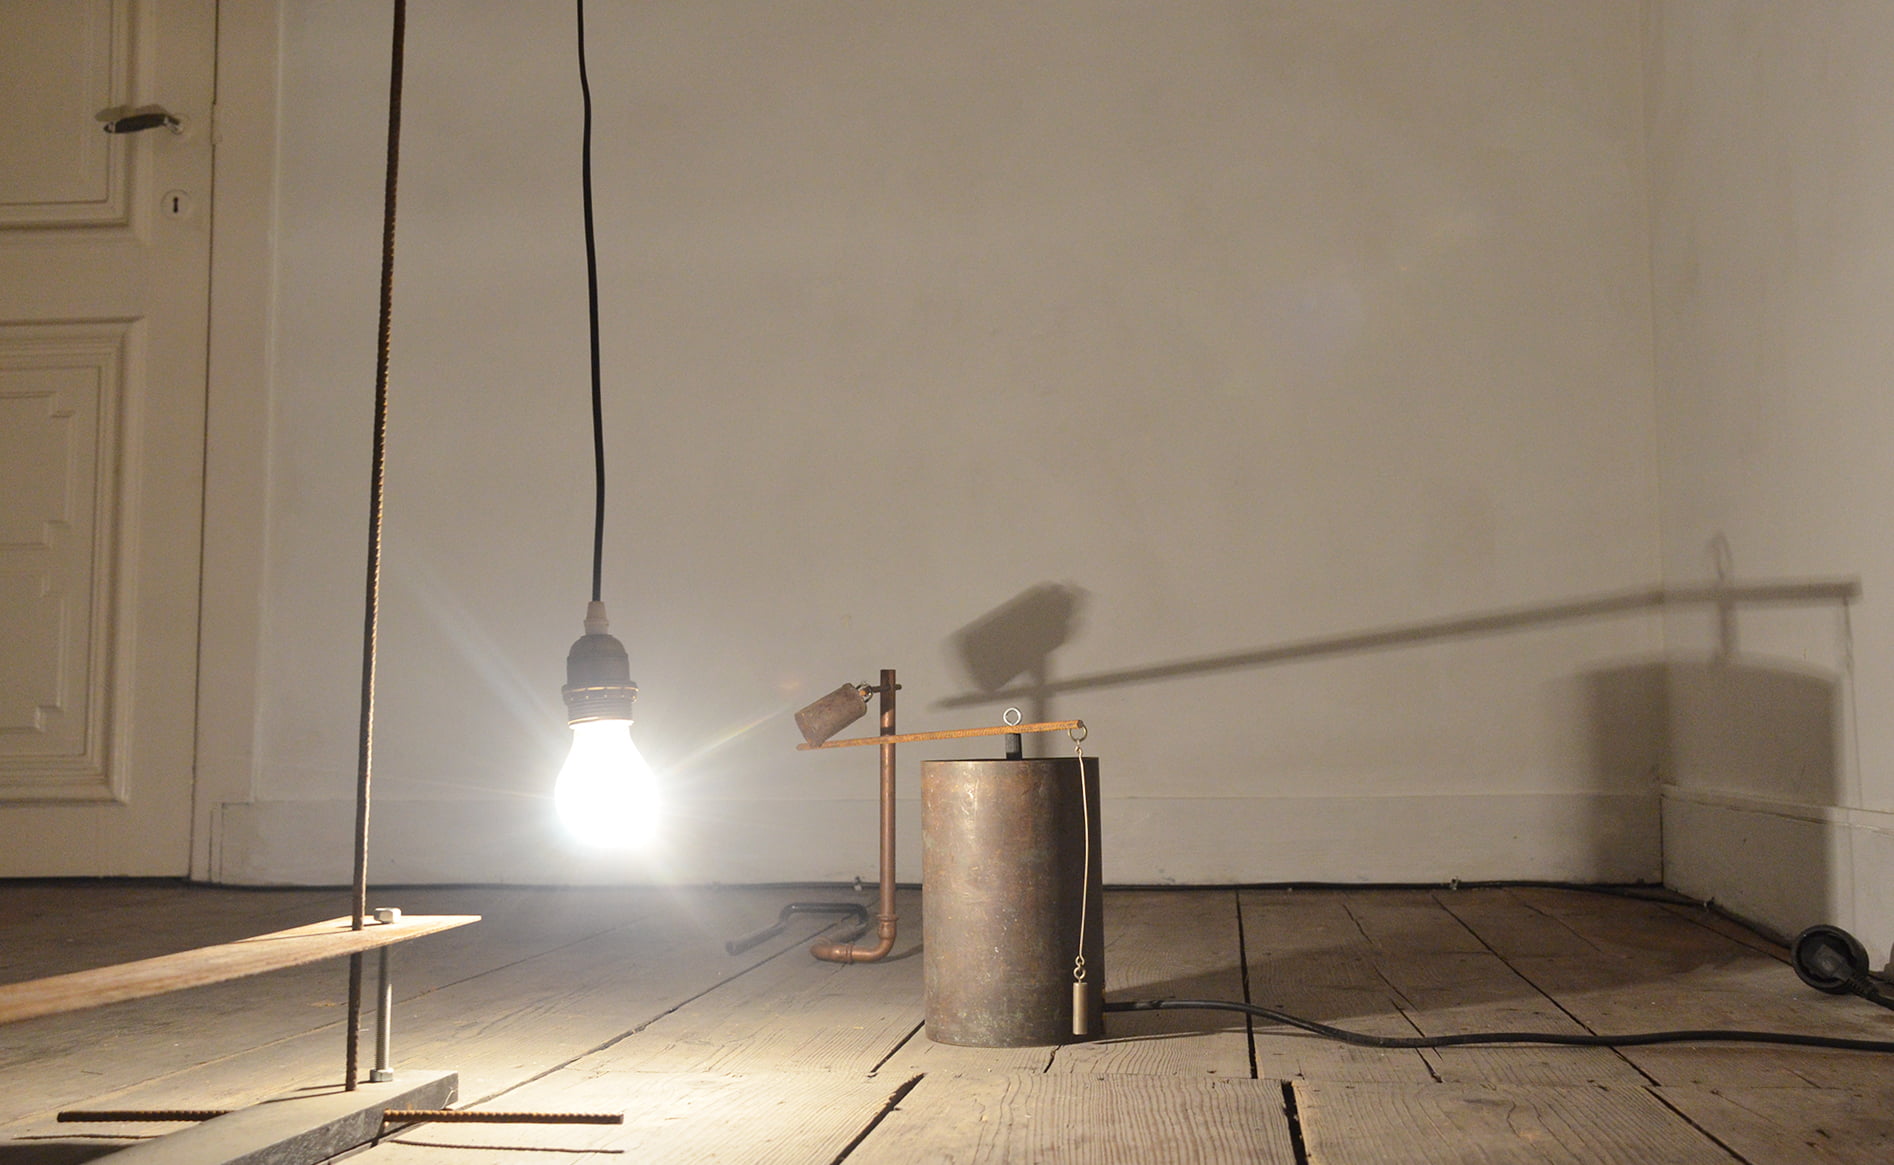 Light Bulb Hanging on a Cable, Copper Pipes and Bell| by Anna Godzina.